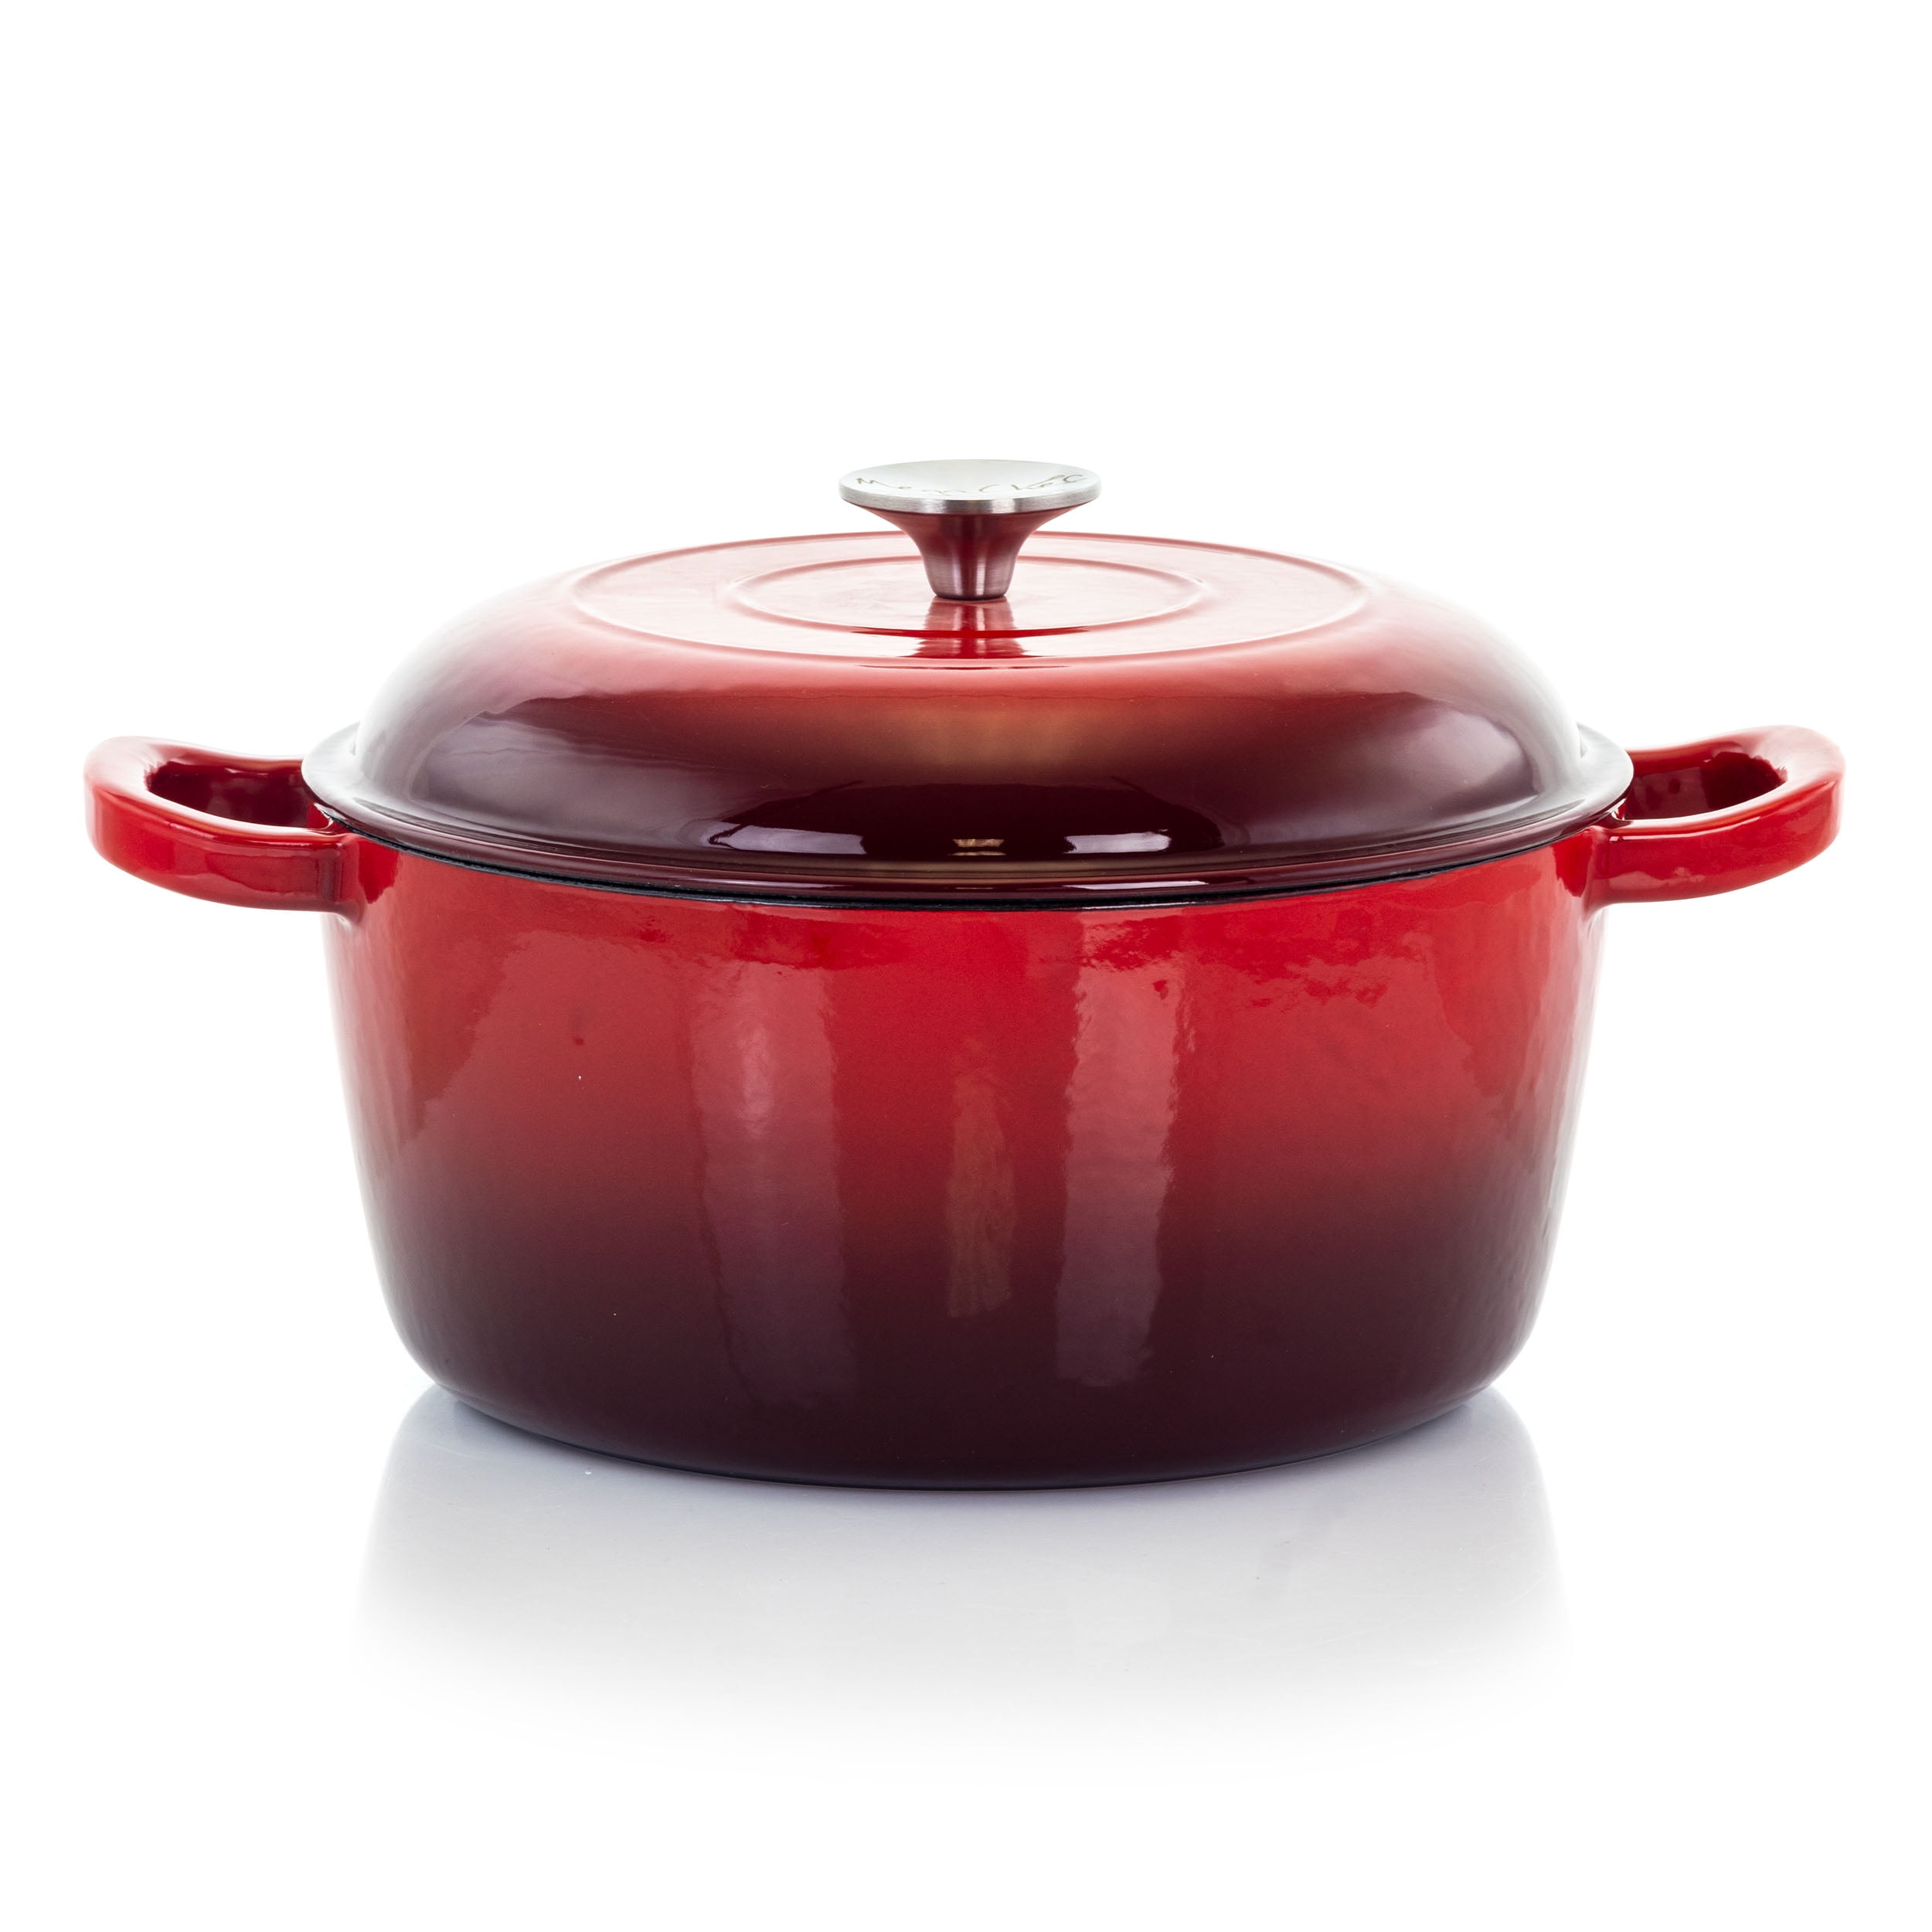 Rachael Ray 5qt Enameled Cast Iron Dutch Oven Casserole Pot with Lid Red